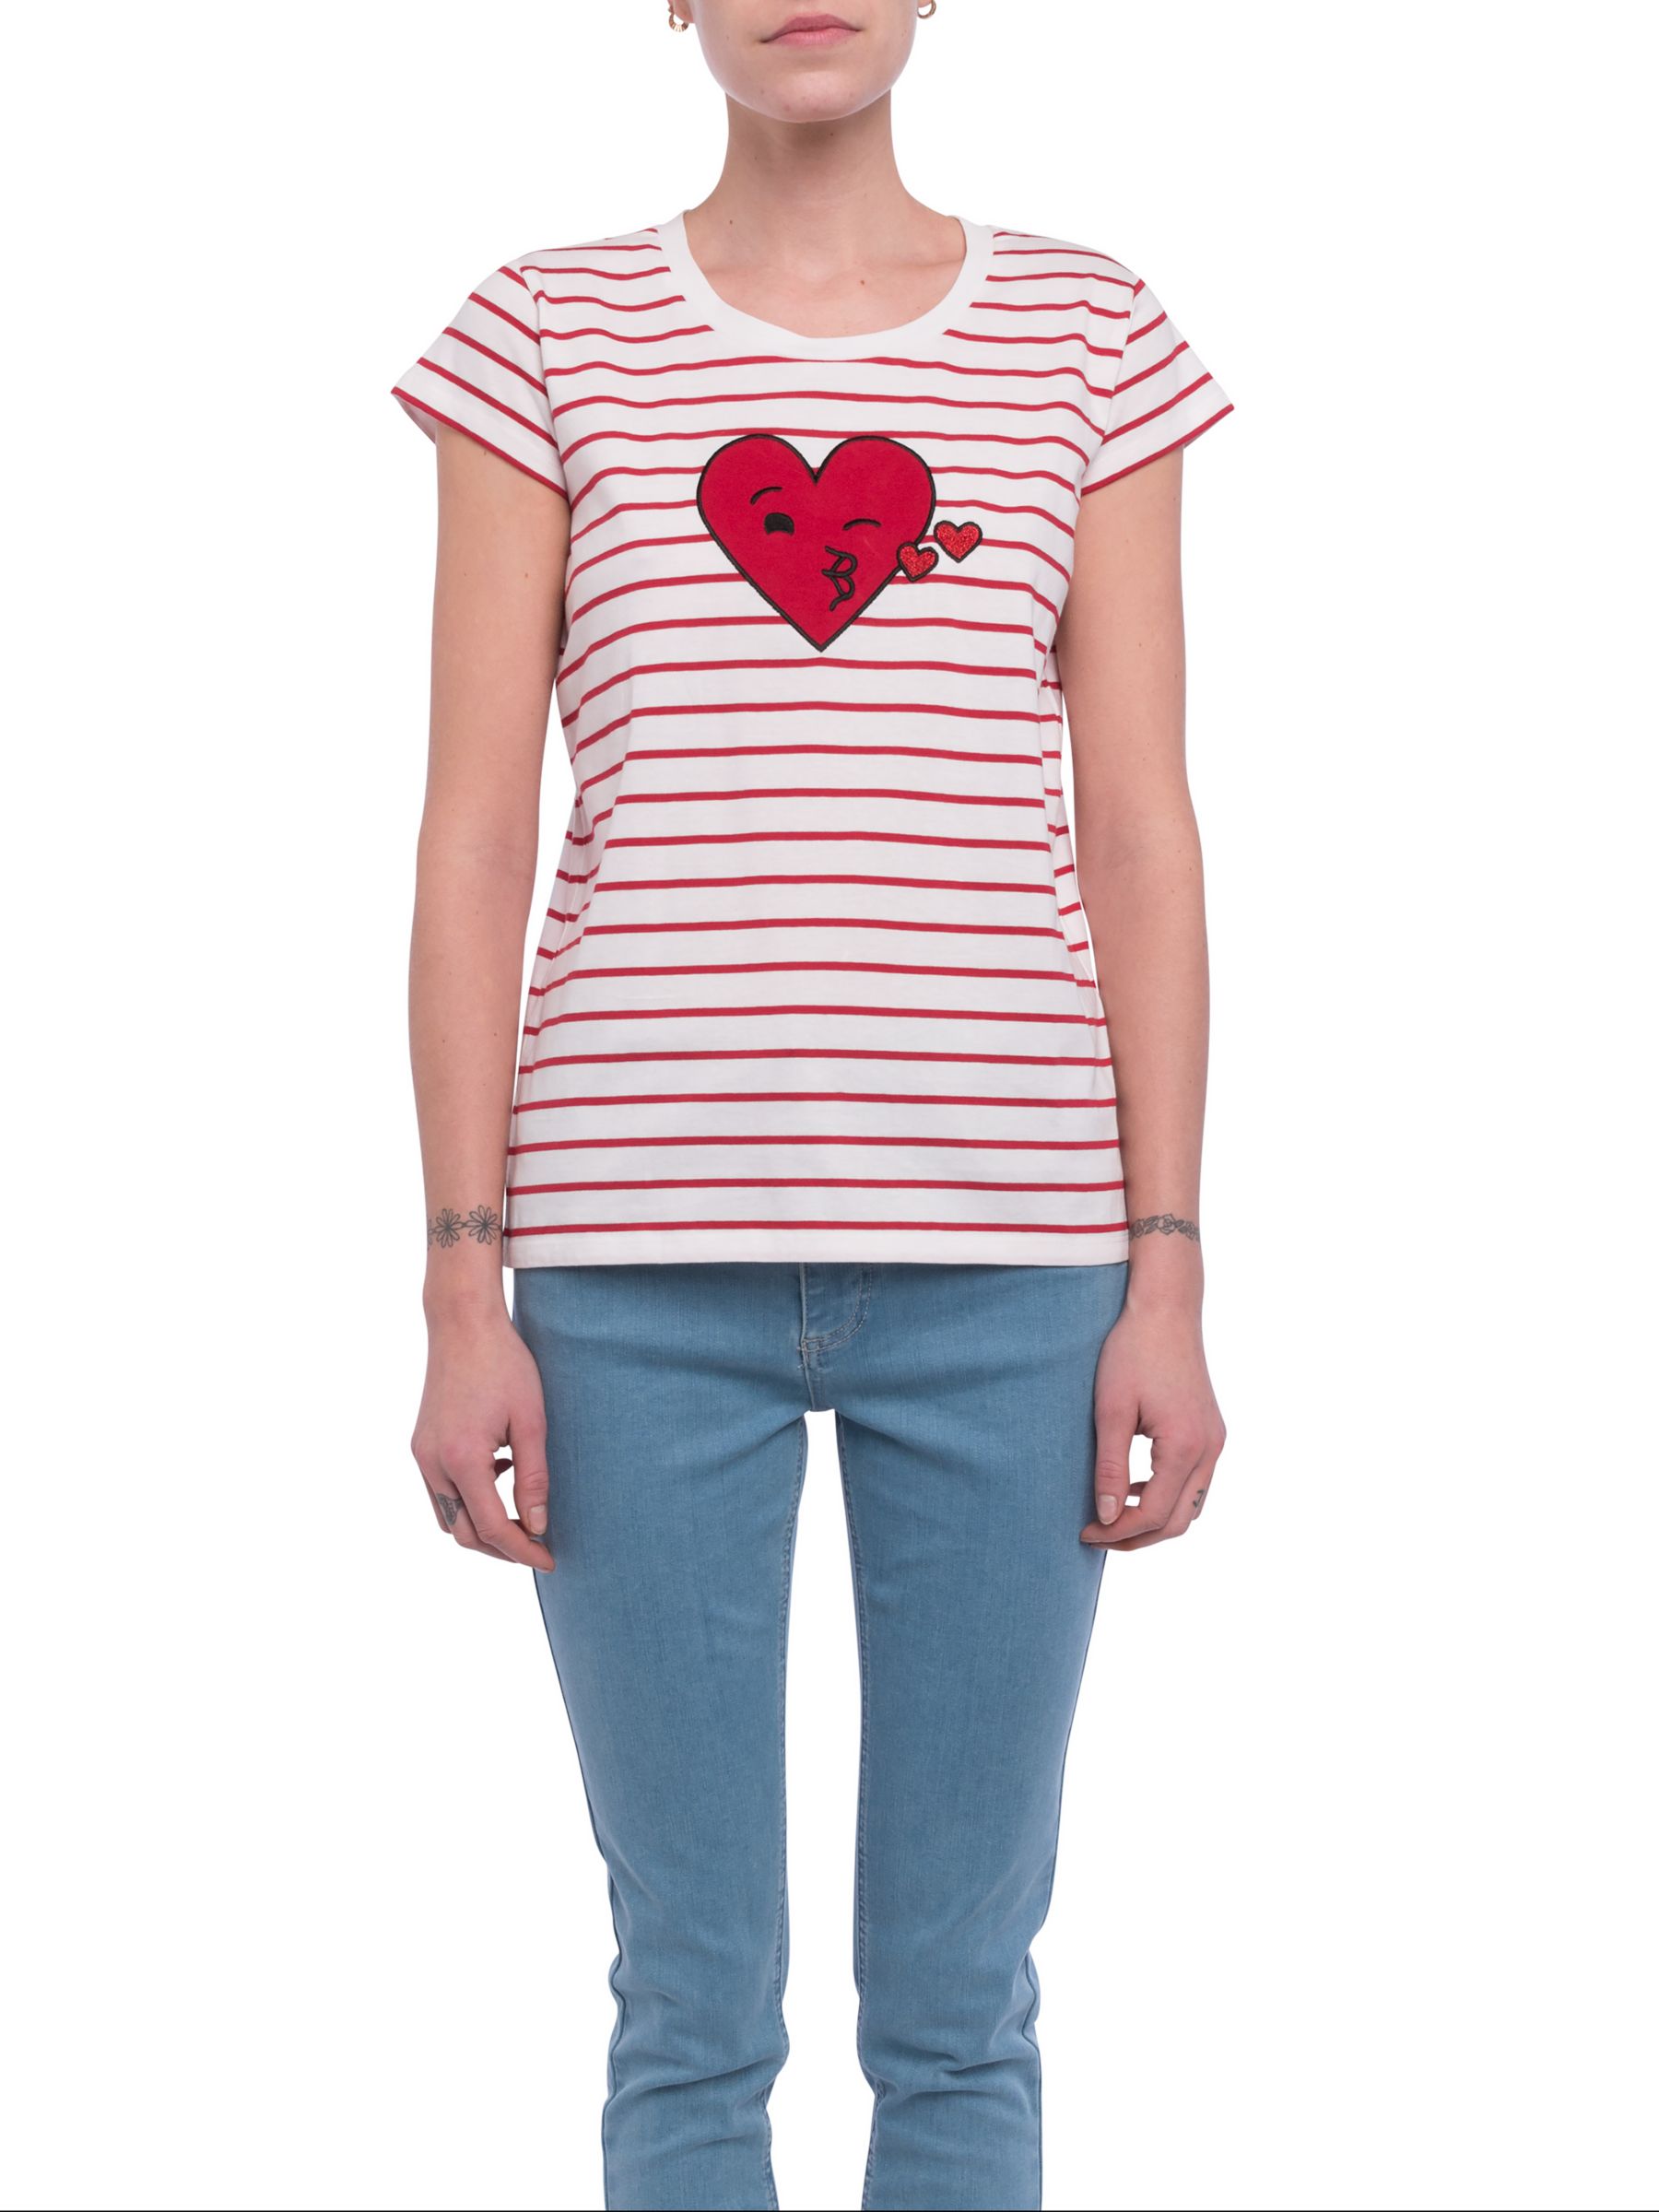 white tshirt with red heart